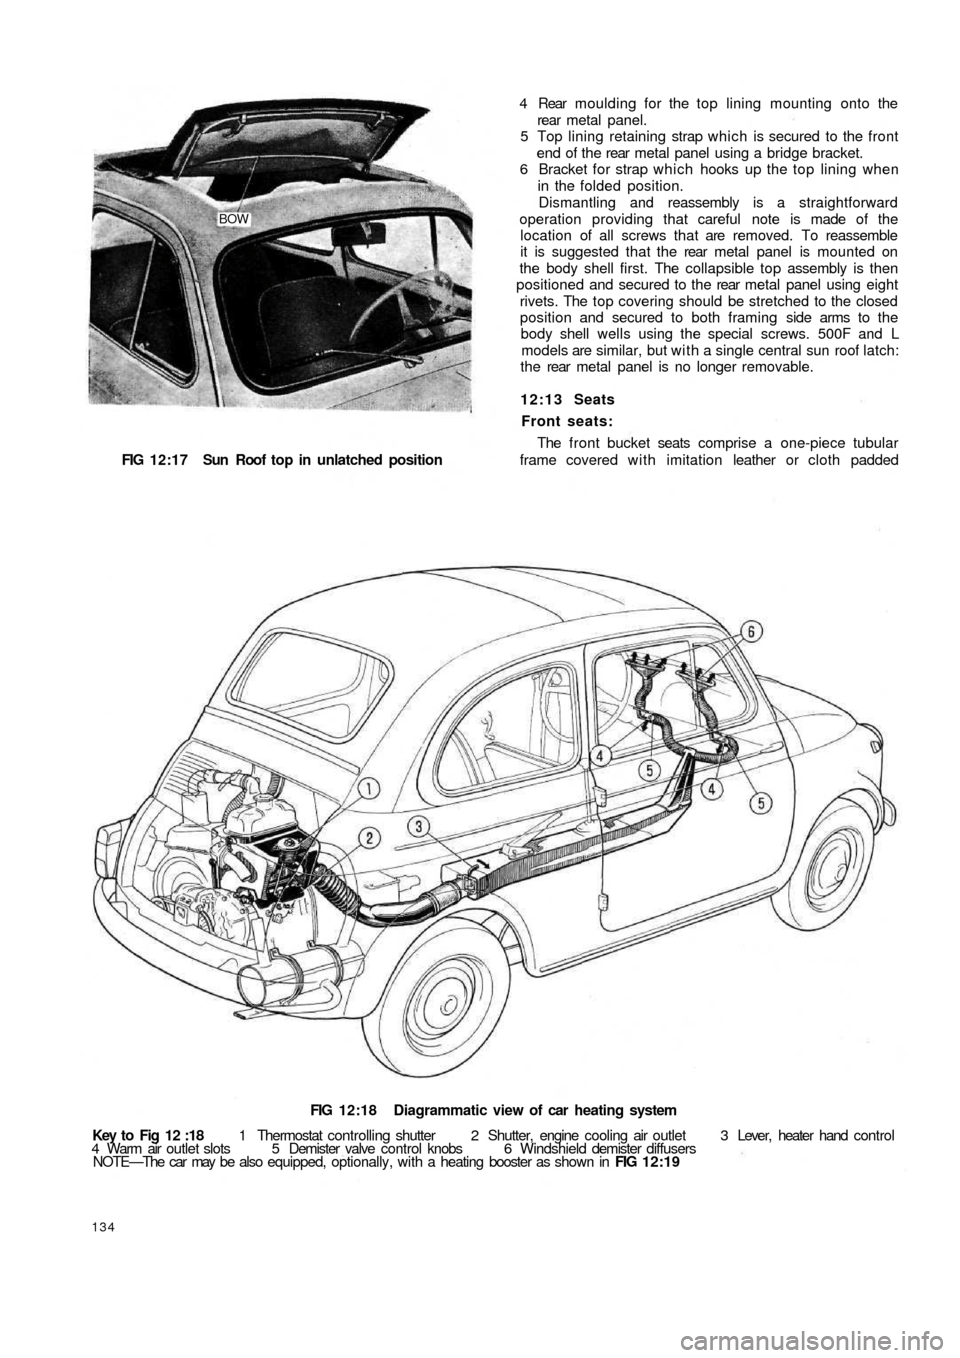 FIAT 500 1973 1.G Workshop Manual BOW
FIG 12:17  Sun Roof  top   in  unlatched position
FIG 12:18 Diagrammatic view of car heating system
Key to Fig 12 :18 1 Thermostat controlling shutter  2  Shutter,  engine  cooling air outlet  3 L